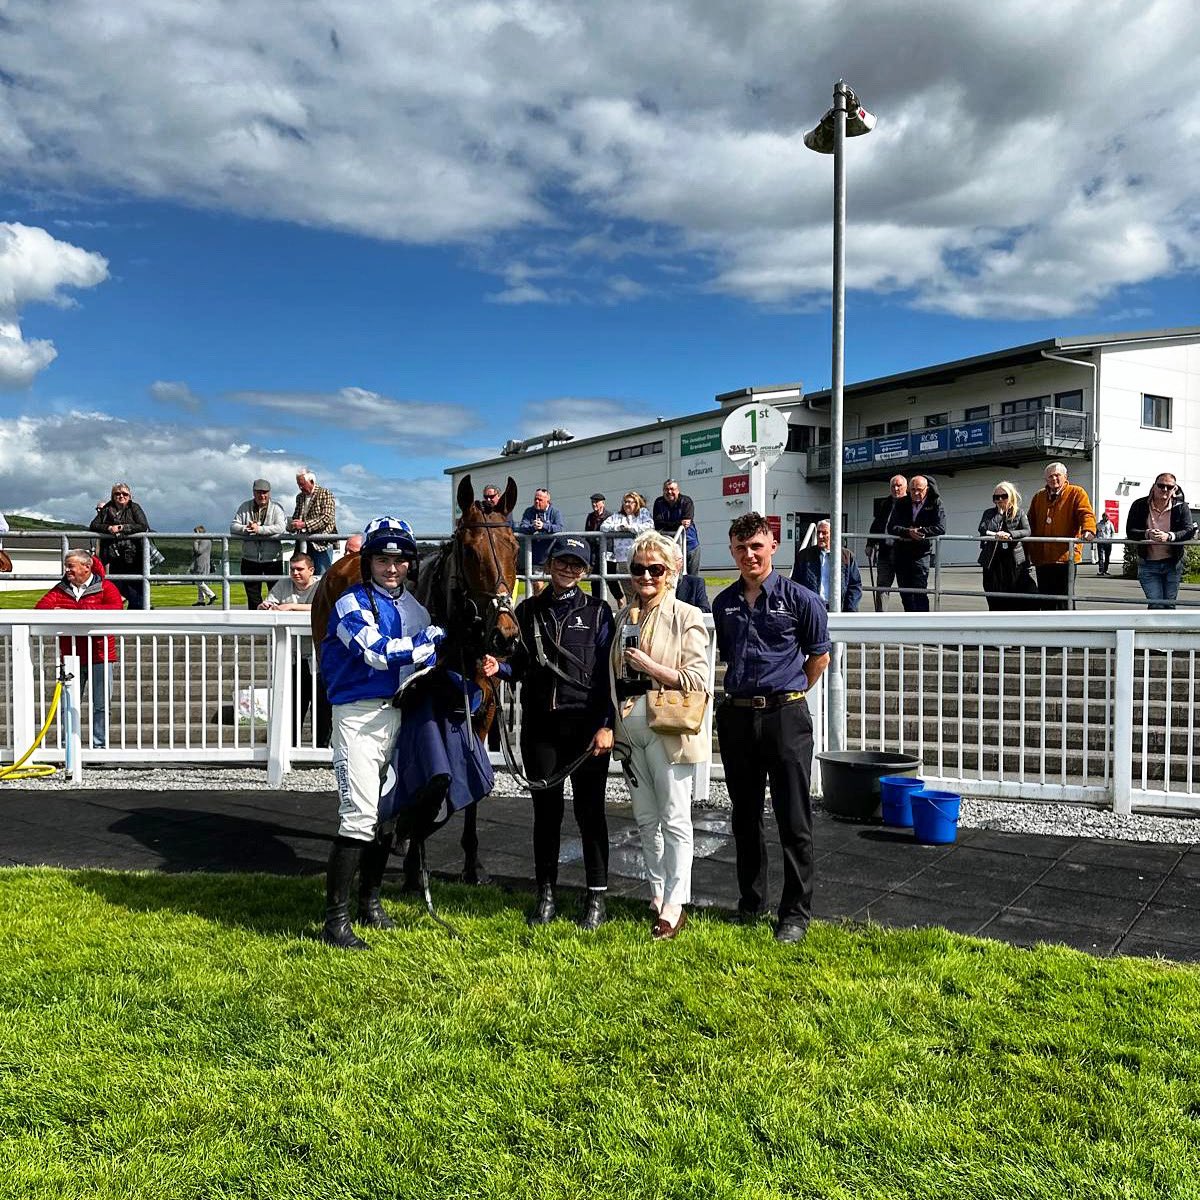 Spitalfield with Jonj, Alex, Jack and owner Mairead Liston after winning at Ffos Las today. Mairead has been an owner with me since my time up in Cumbria and we are all absolutely thrilled for her! Congratulations!